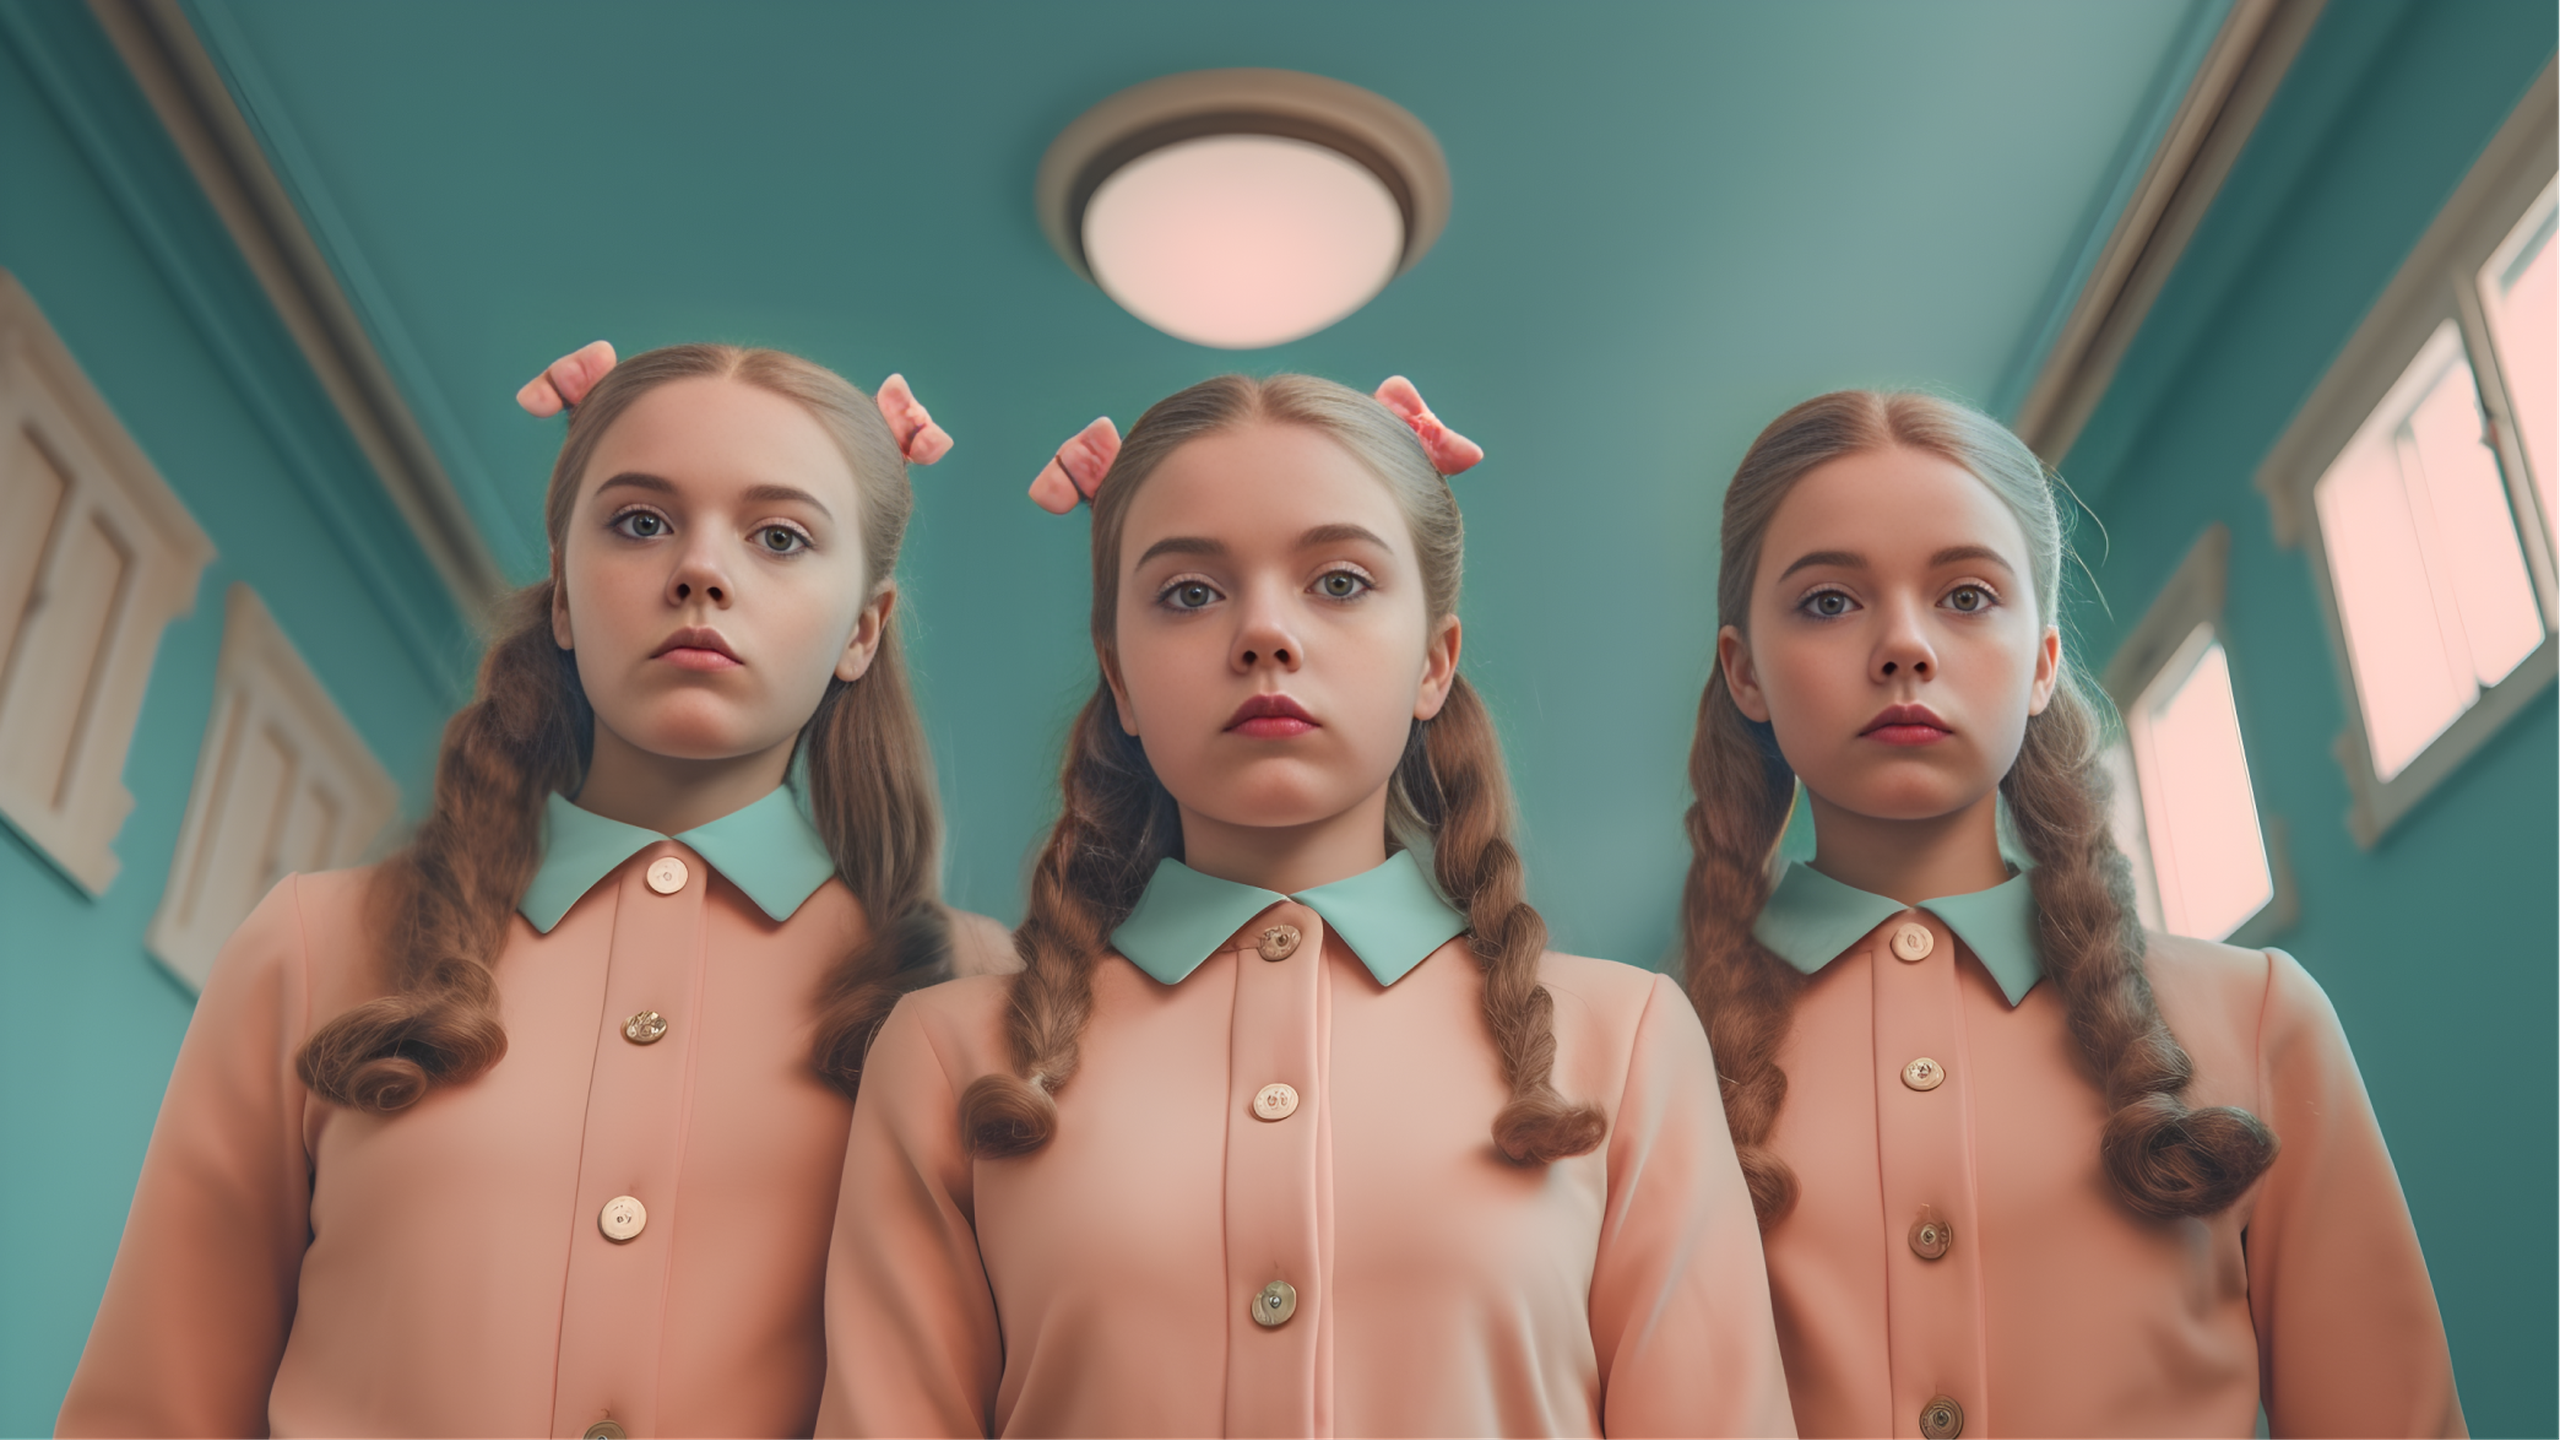 Photo realistic image: In a blue room, three hyper-realistic young girls stare down, from above, giving the illusion of triplets - in the style of Wes Anderson. Each is dressed in a pink button up shirt with a blue collar, they have braided pigtails. Whilst they look triplet-esque, each girl is slightly different. 